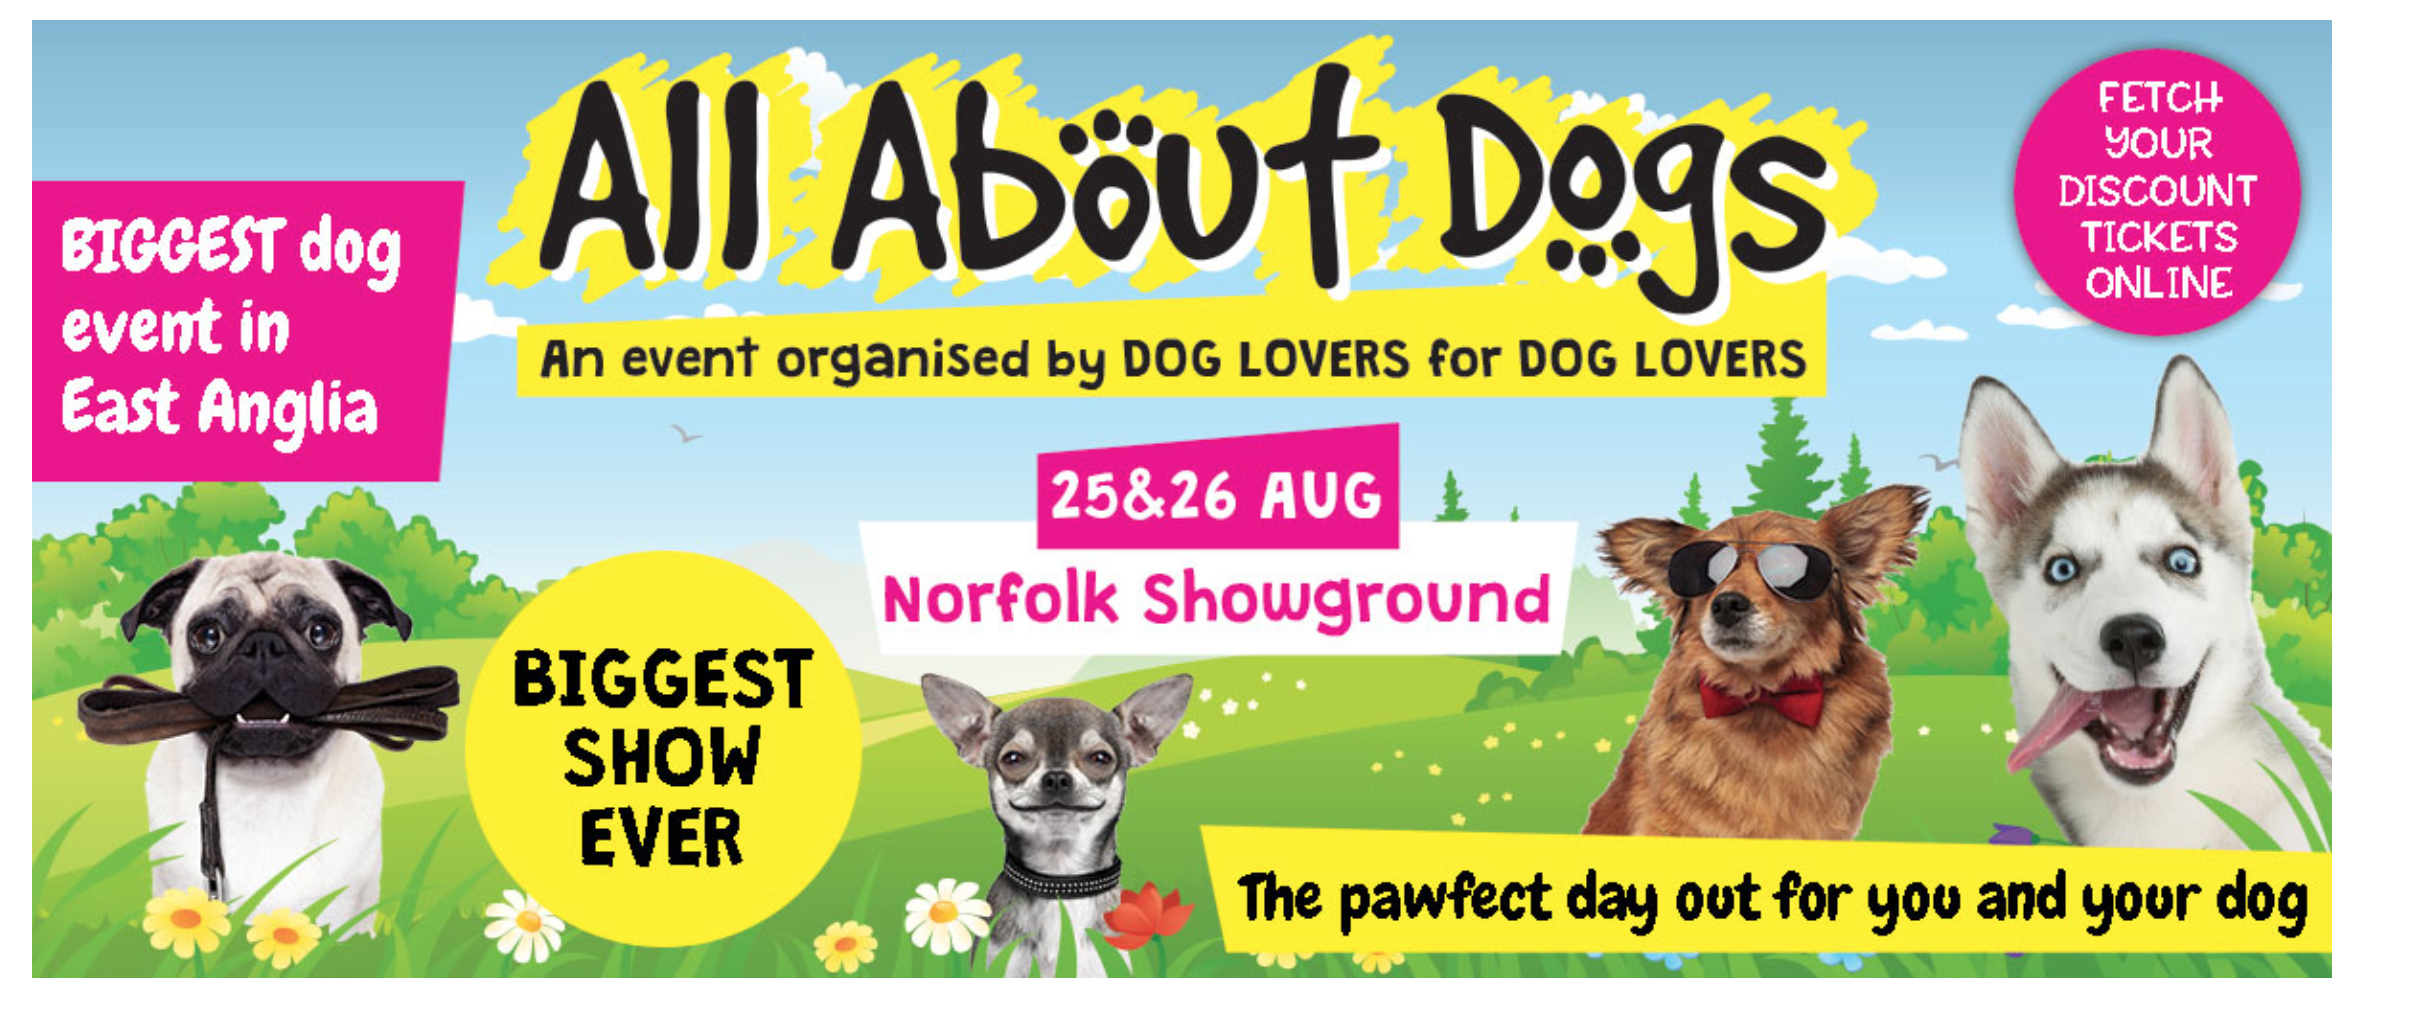 All About Dogs Show 2019 – Adventures 